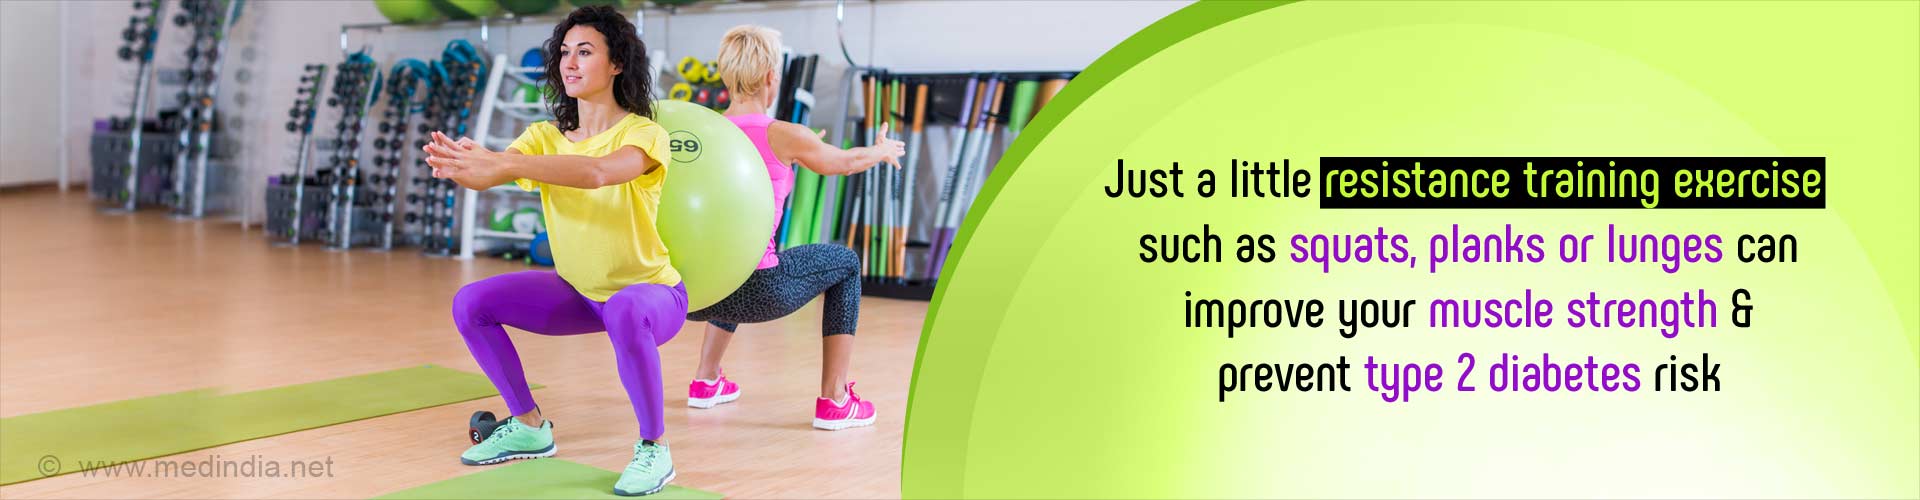 Just a little resistance training exercise such as squats, planks or lunges can improve your muscle strength and prevent type 2 diabetes risk.